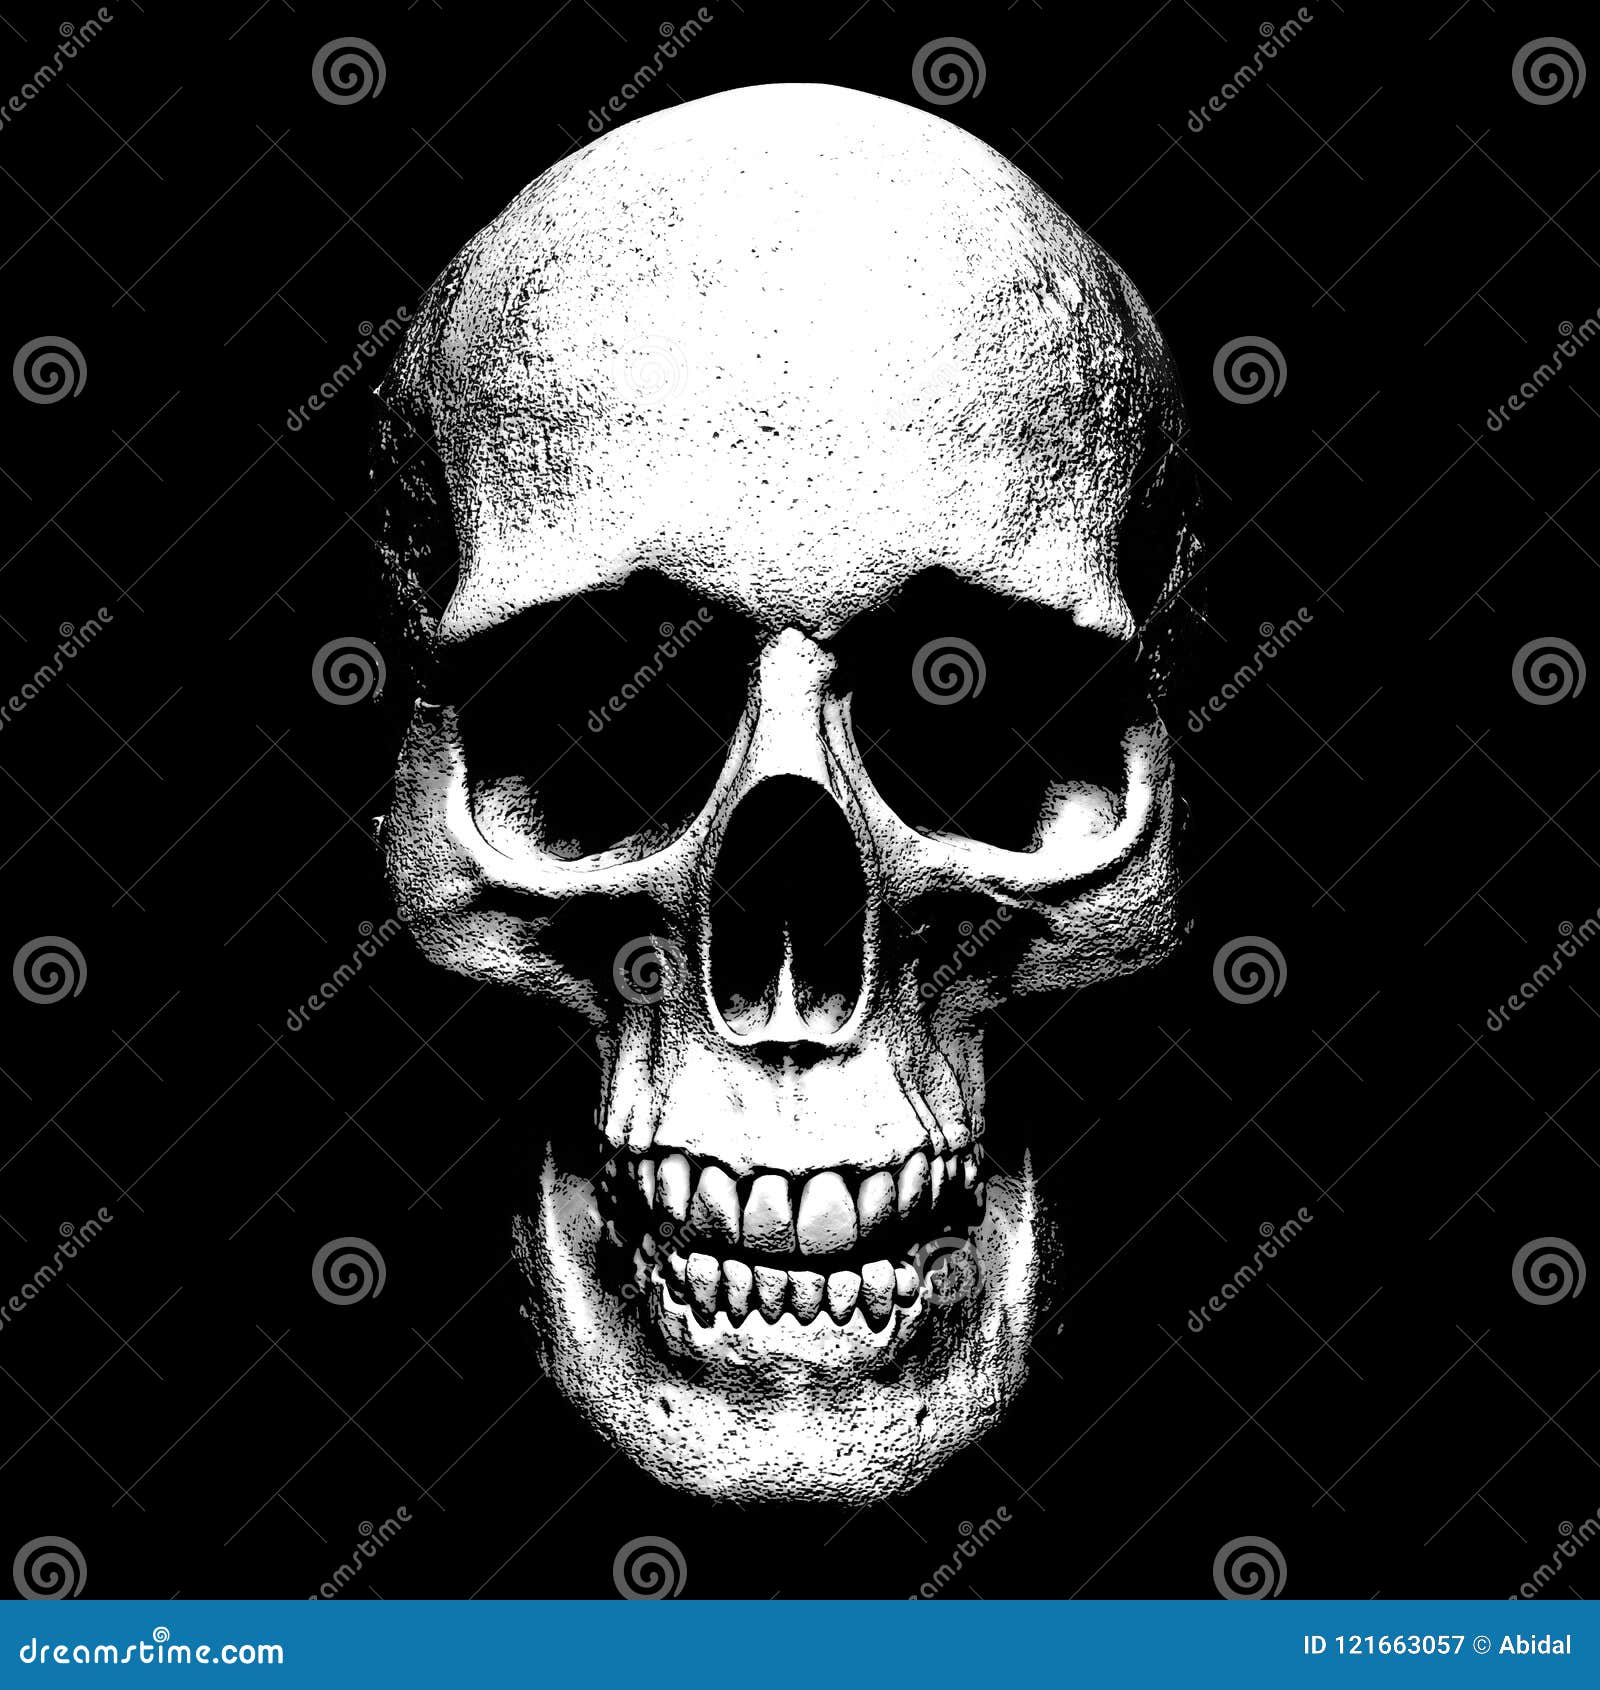 Skull Isolated in Black Background 3d Illustration Stock Illustration -  Illustration of darkness, drawing: 121663057